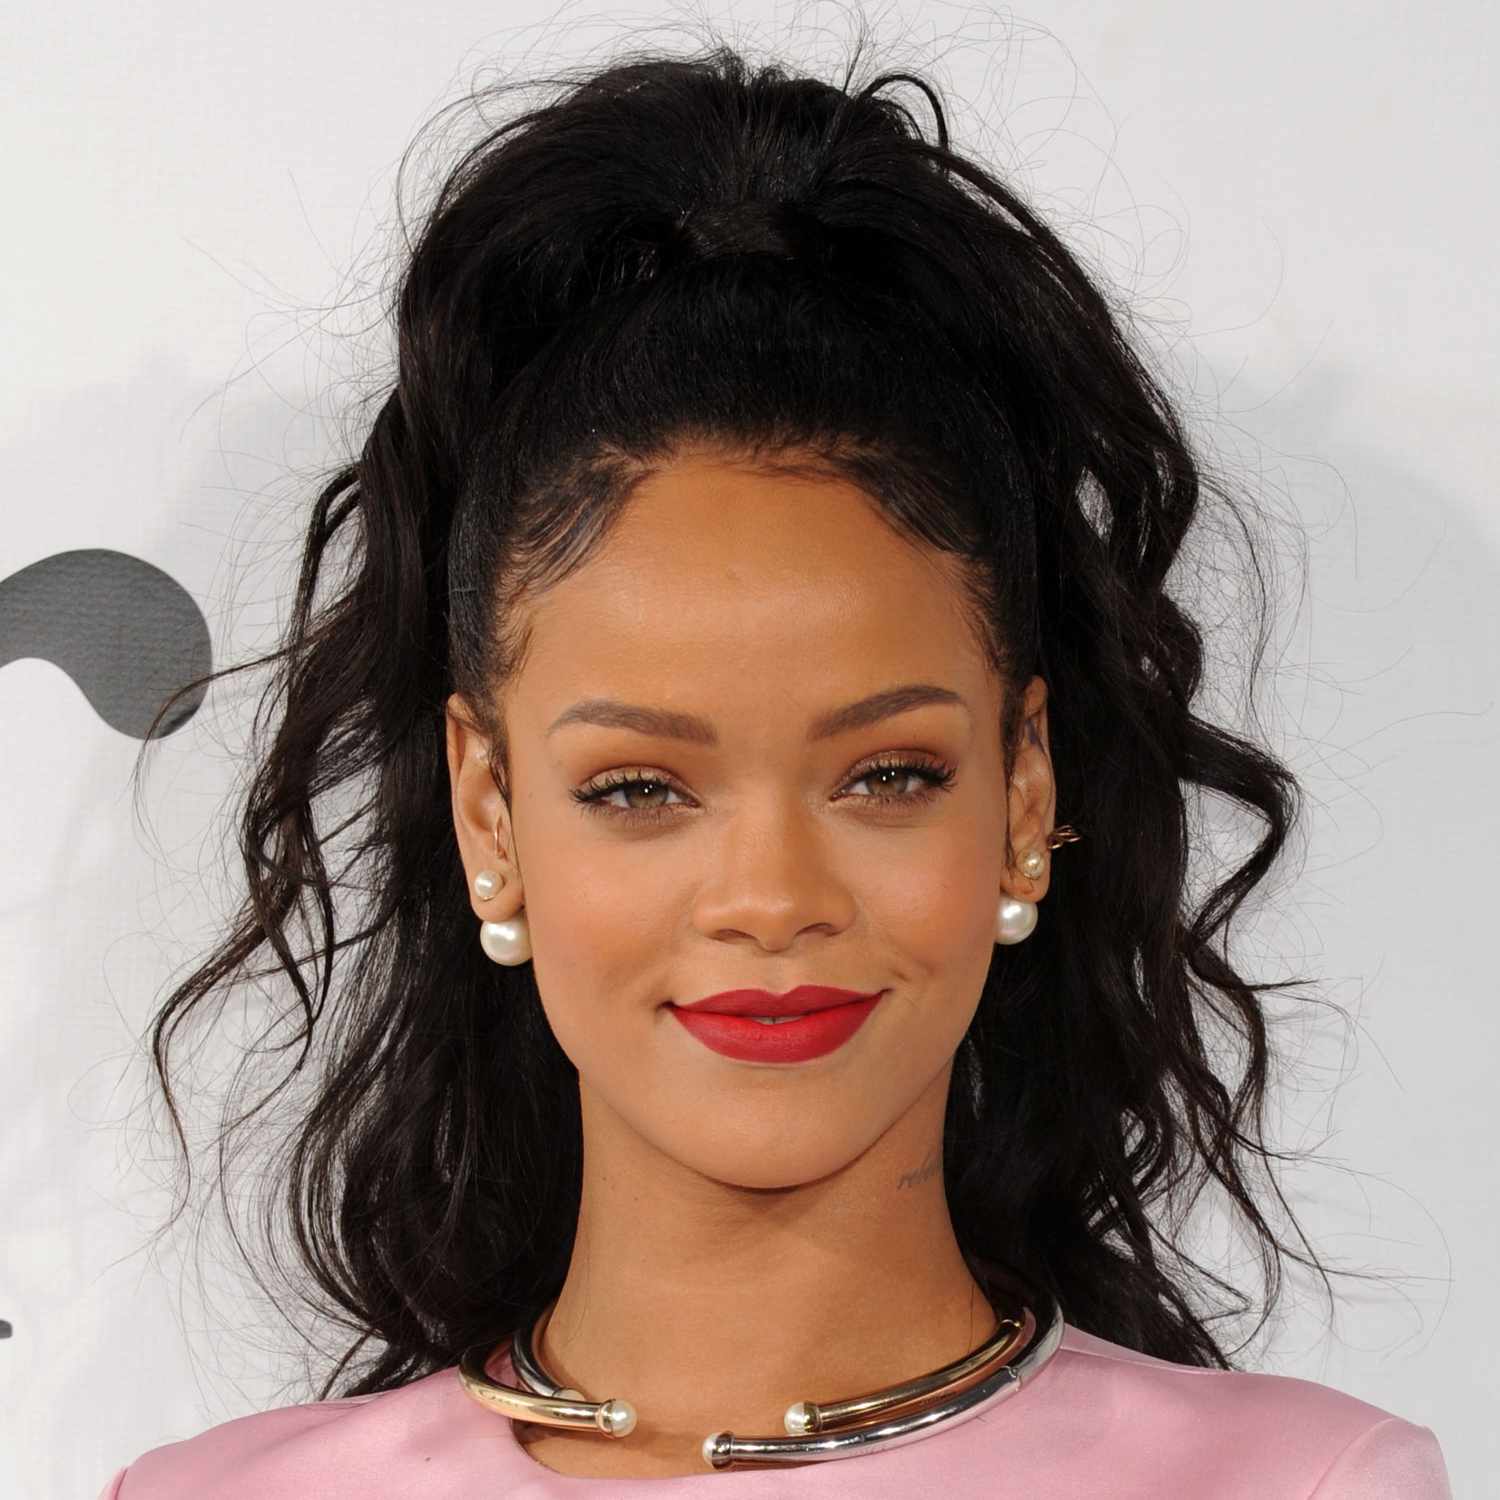 Rihanna wears a high ponytail hairstyle with teased roots and curls